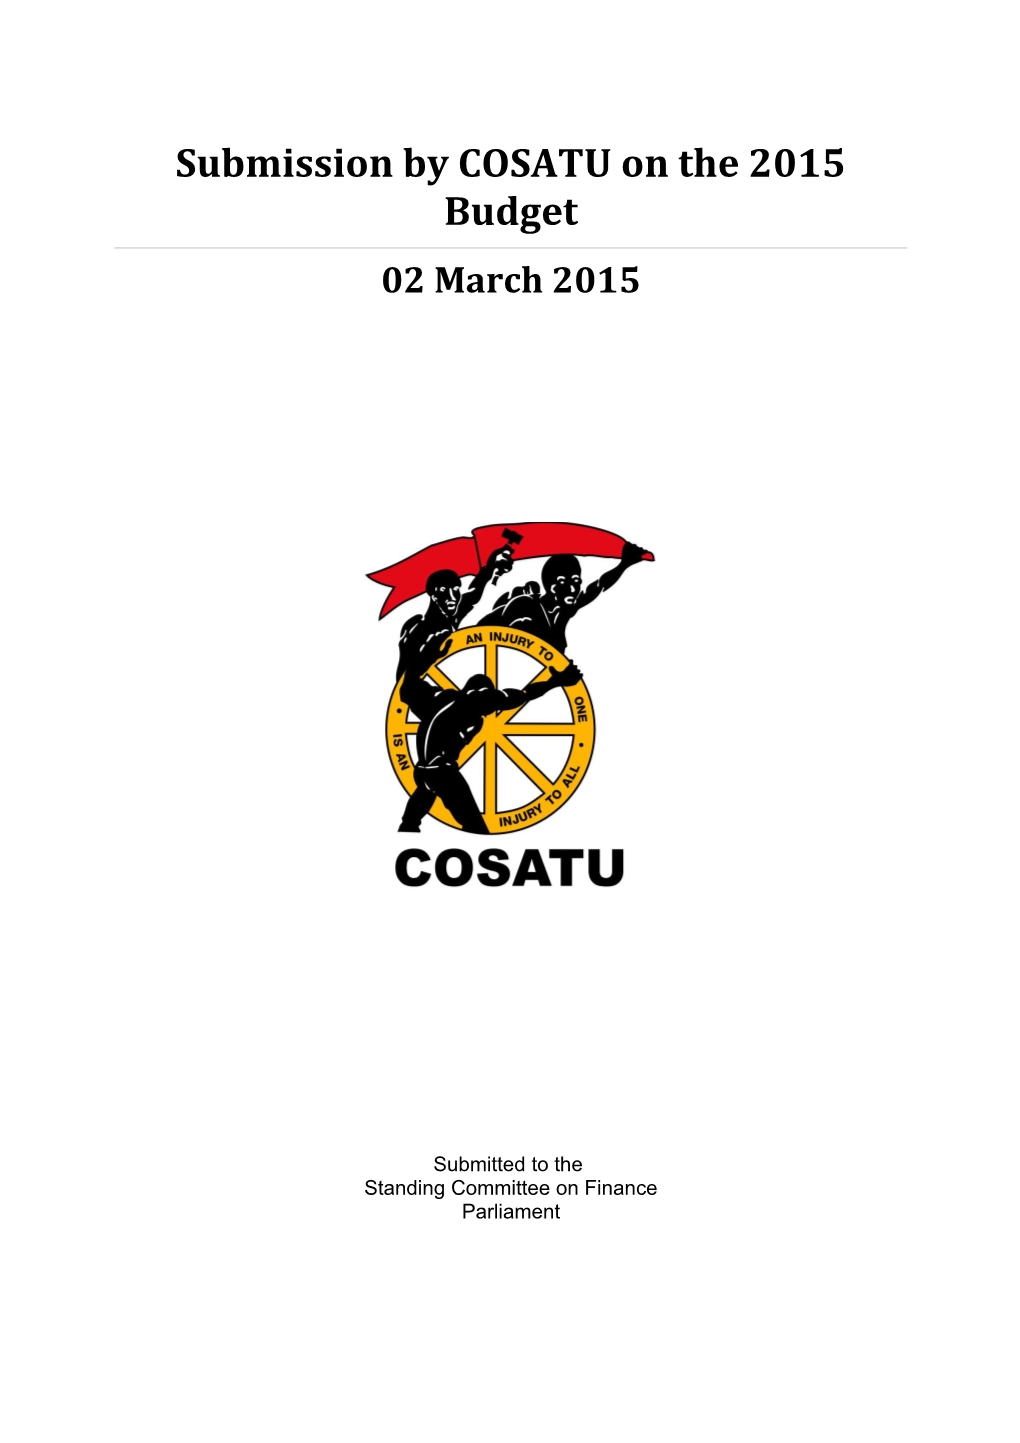 Submission by COSATU on the 2015 Budget